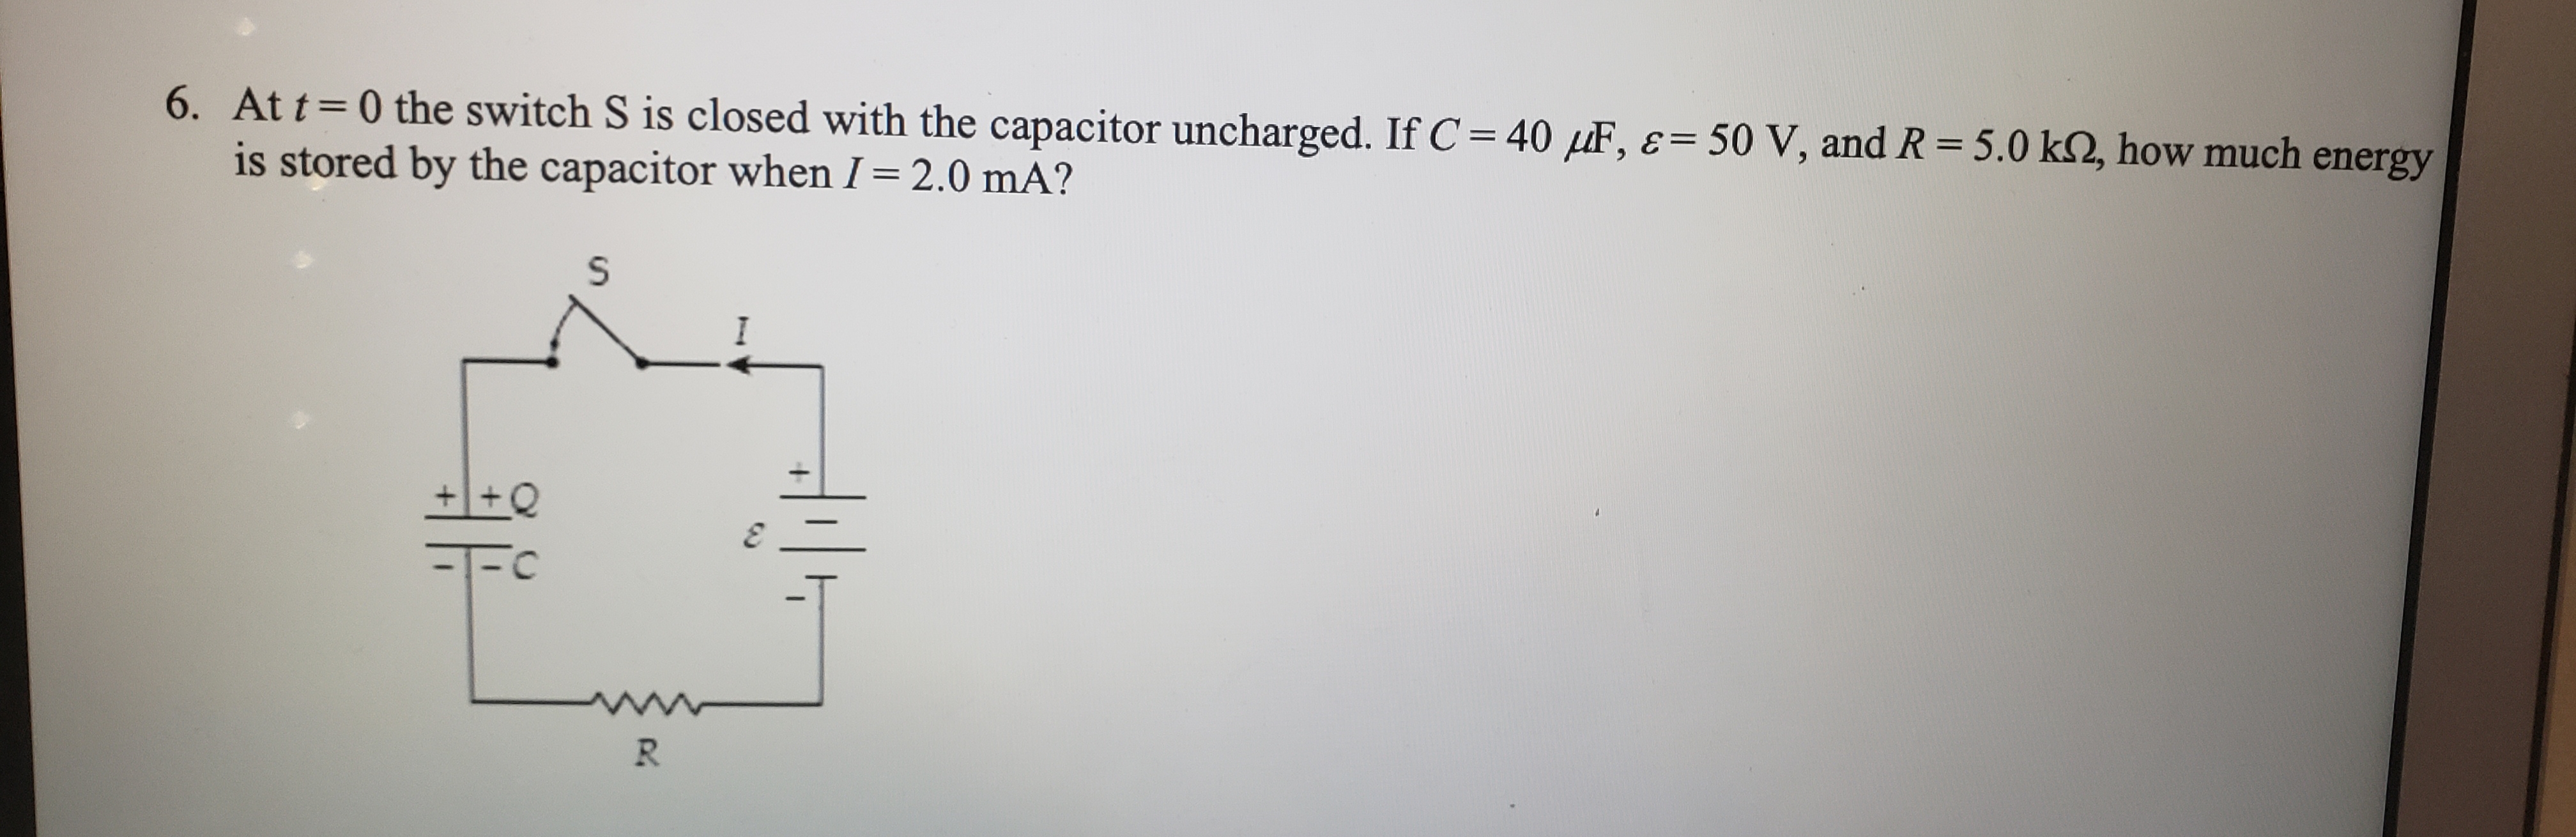 At =0 the switch S is closed with the capacitor unchurged. If C- 40 uF, e- 50 V, and R=5.0 k2, how much energy
is stored by the capacitor whenI = 2.0 mA?
